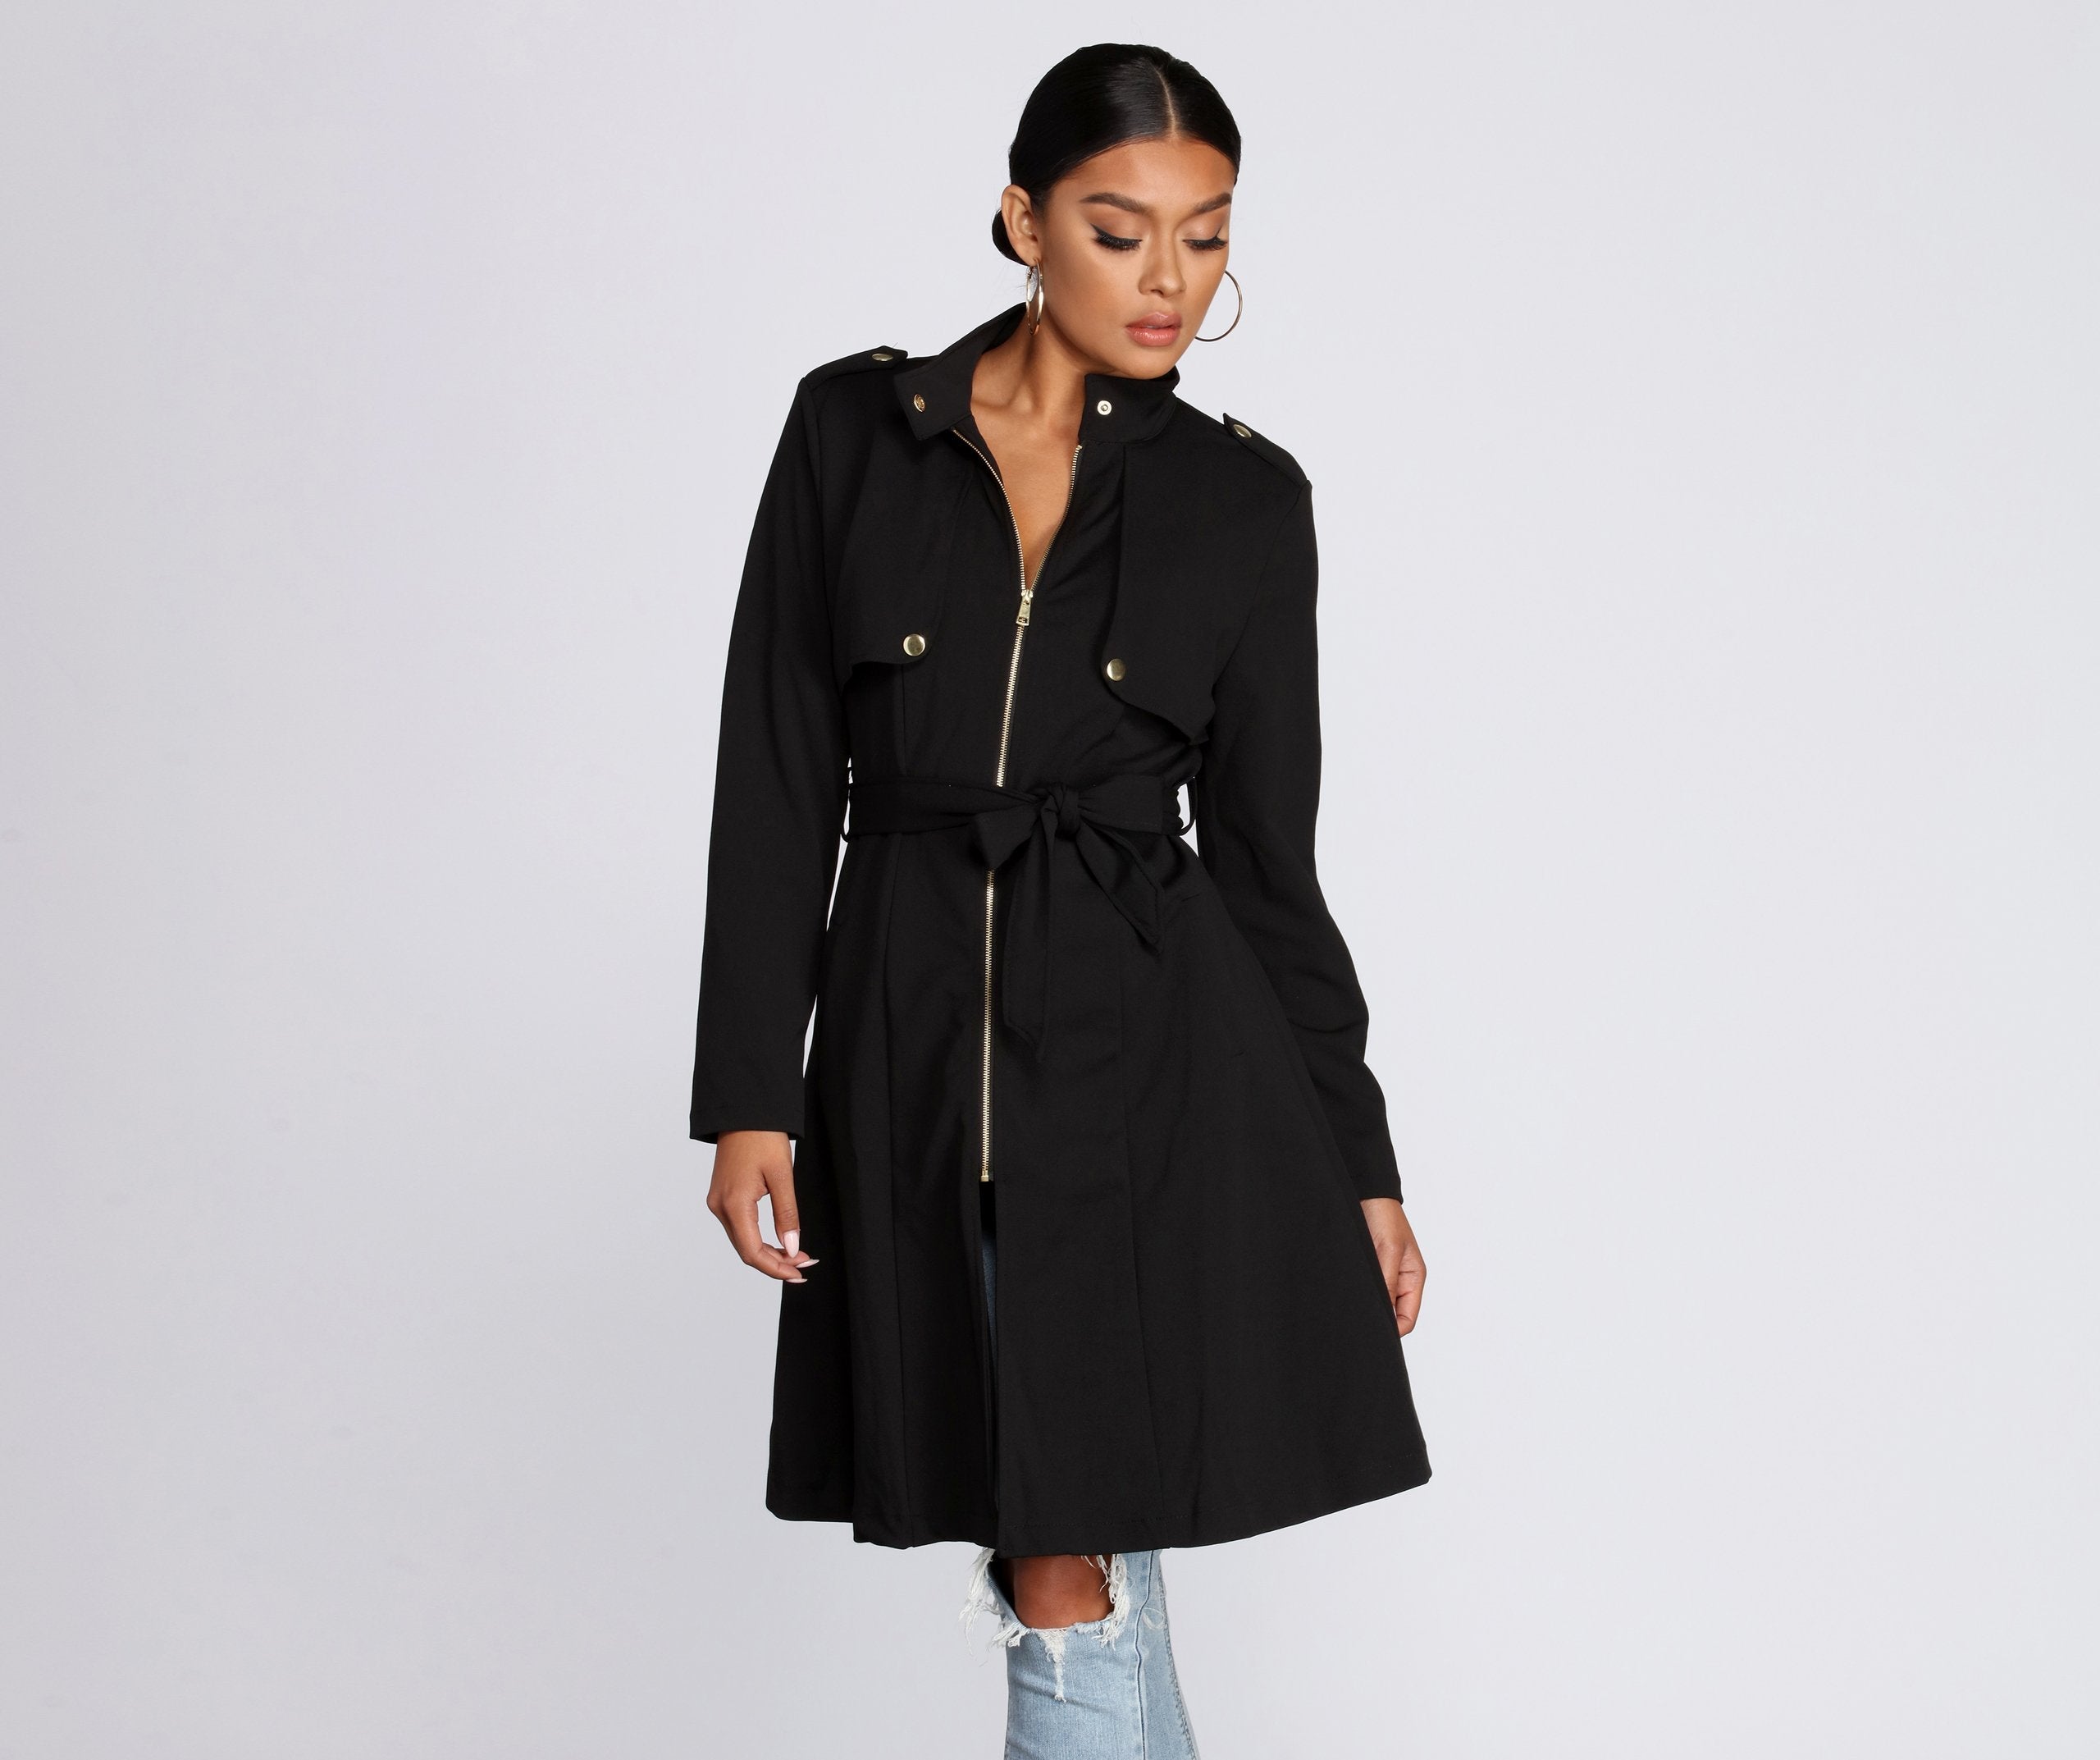 Feminine Flare Zip Up Trench Coat - Lady Occasions